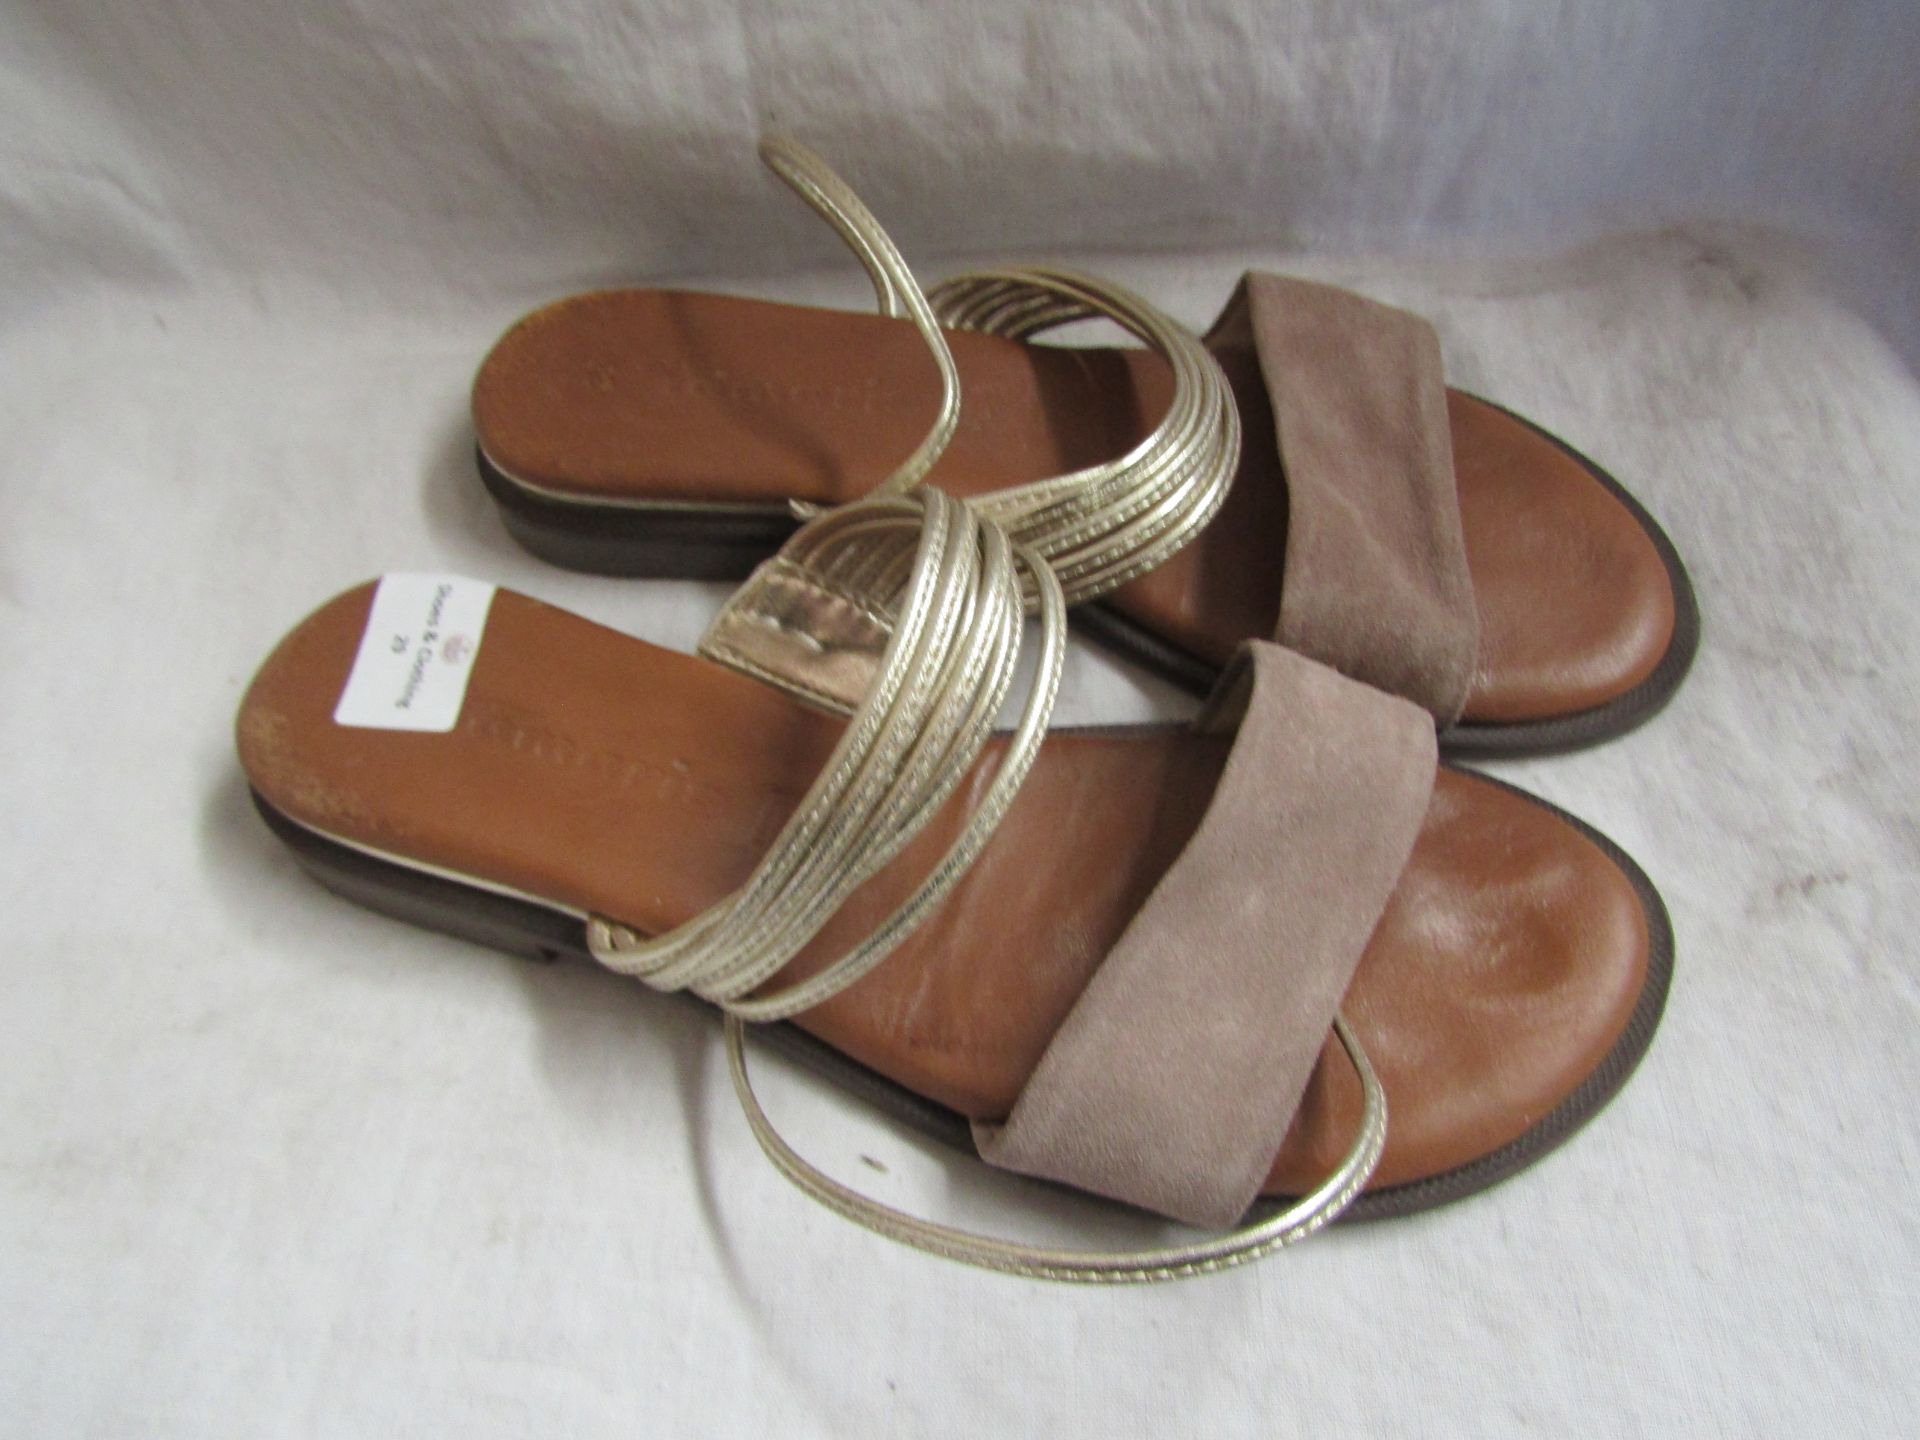 Tamaris Flat Sandal Size 38 ( These Have Been Worn Needs a Small Repair to Small Strap)